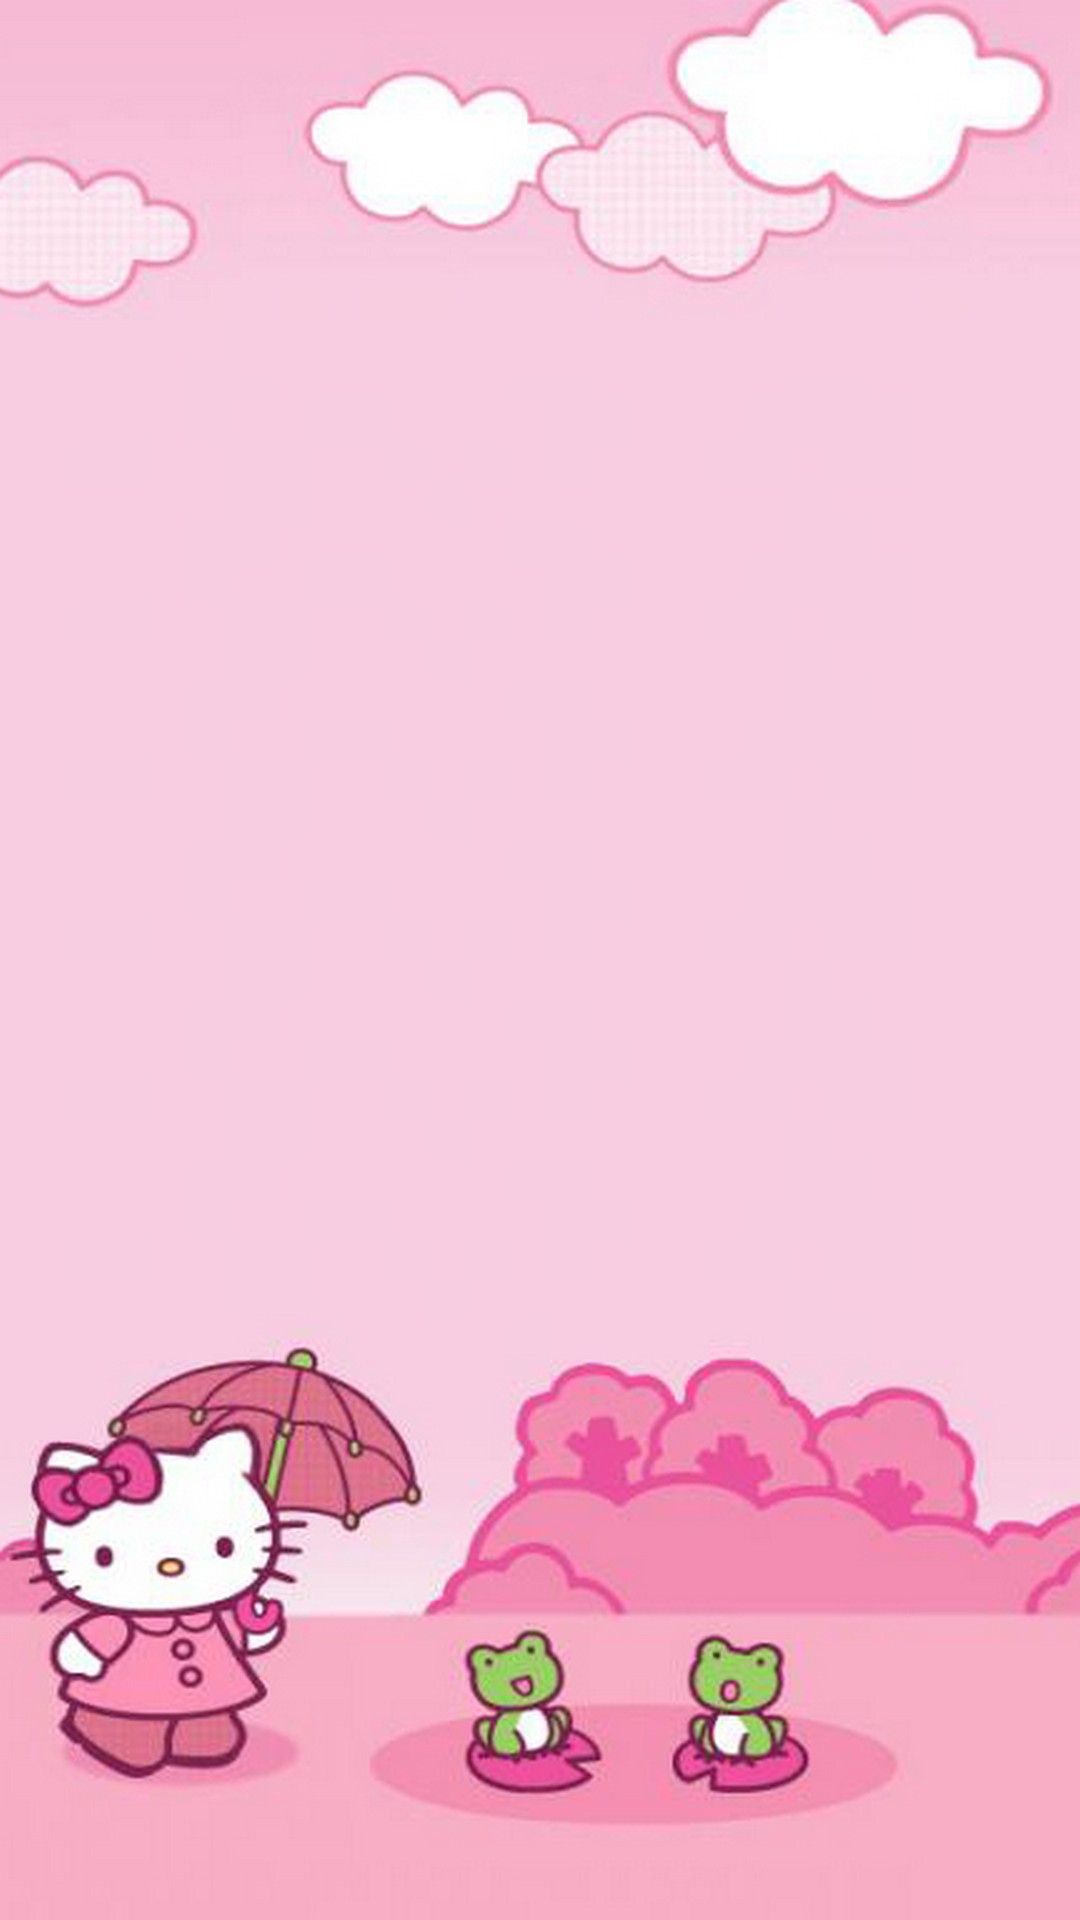 IPhone wallpaper Sanrio Hello Kitty with image resolution 1080x1920 pixel. You can make this wallpaper for your iPhone 5, 6, 7, 8, X backgrounds, Mobile Screensaver, or iPad Lock Screen - Hello Kitty, Sanrio